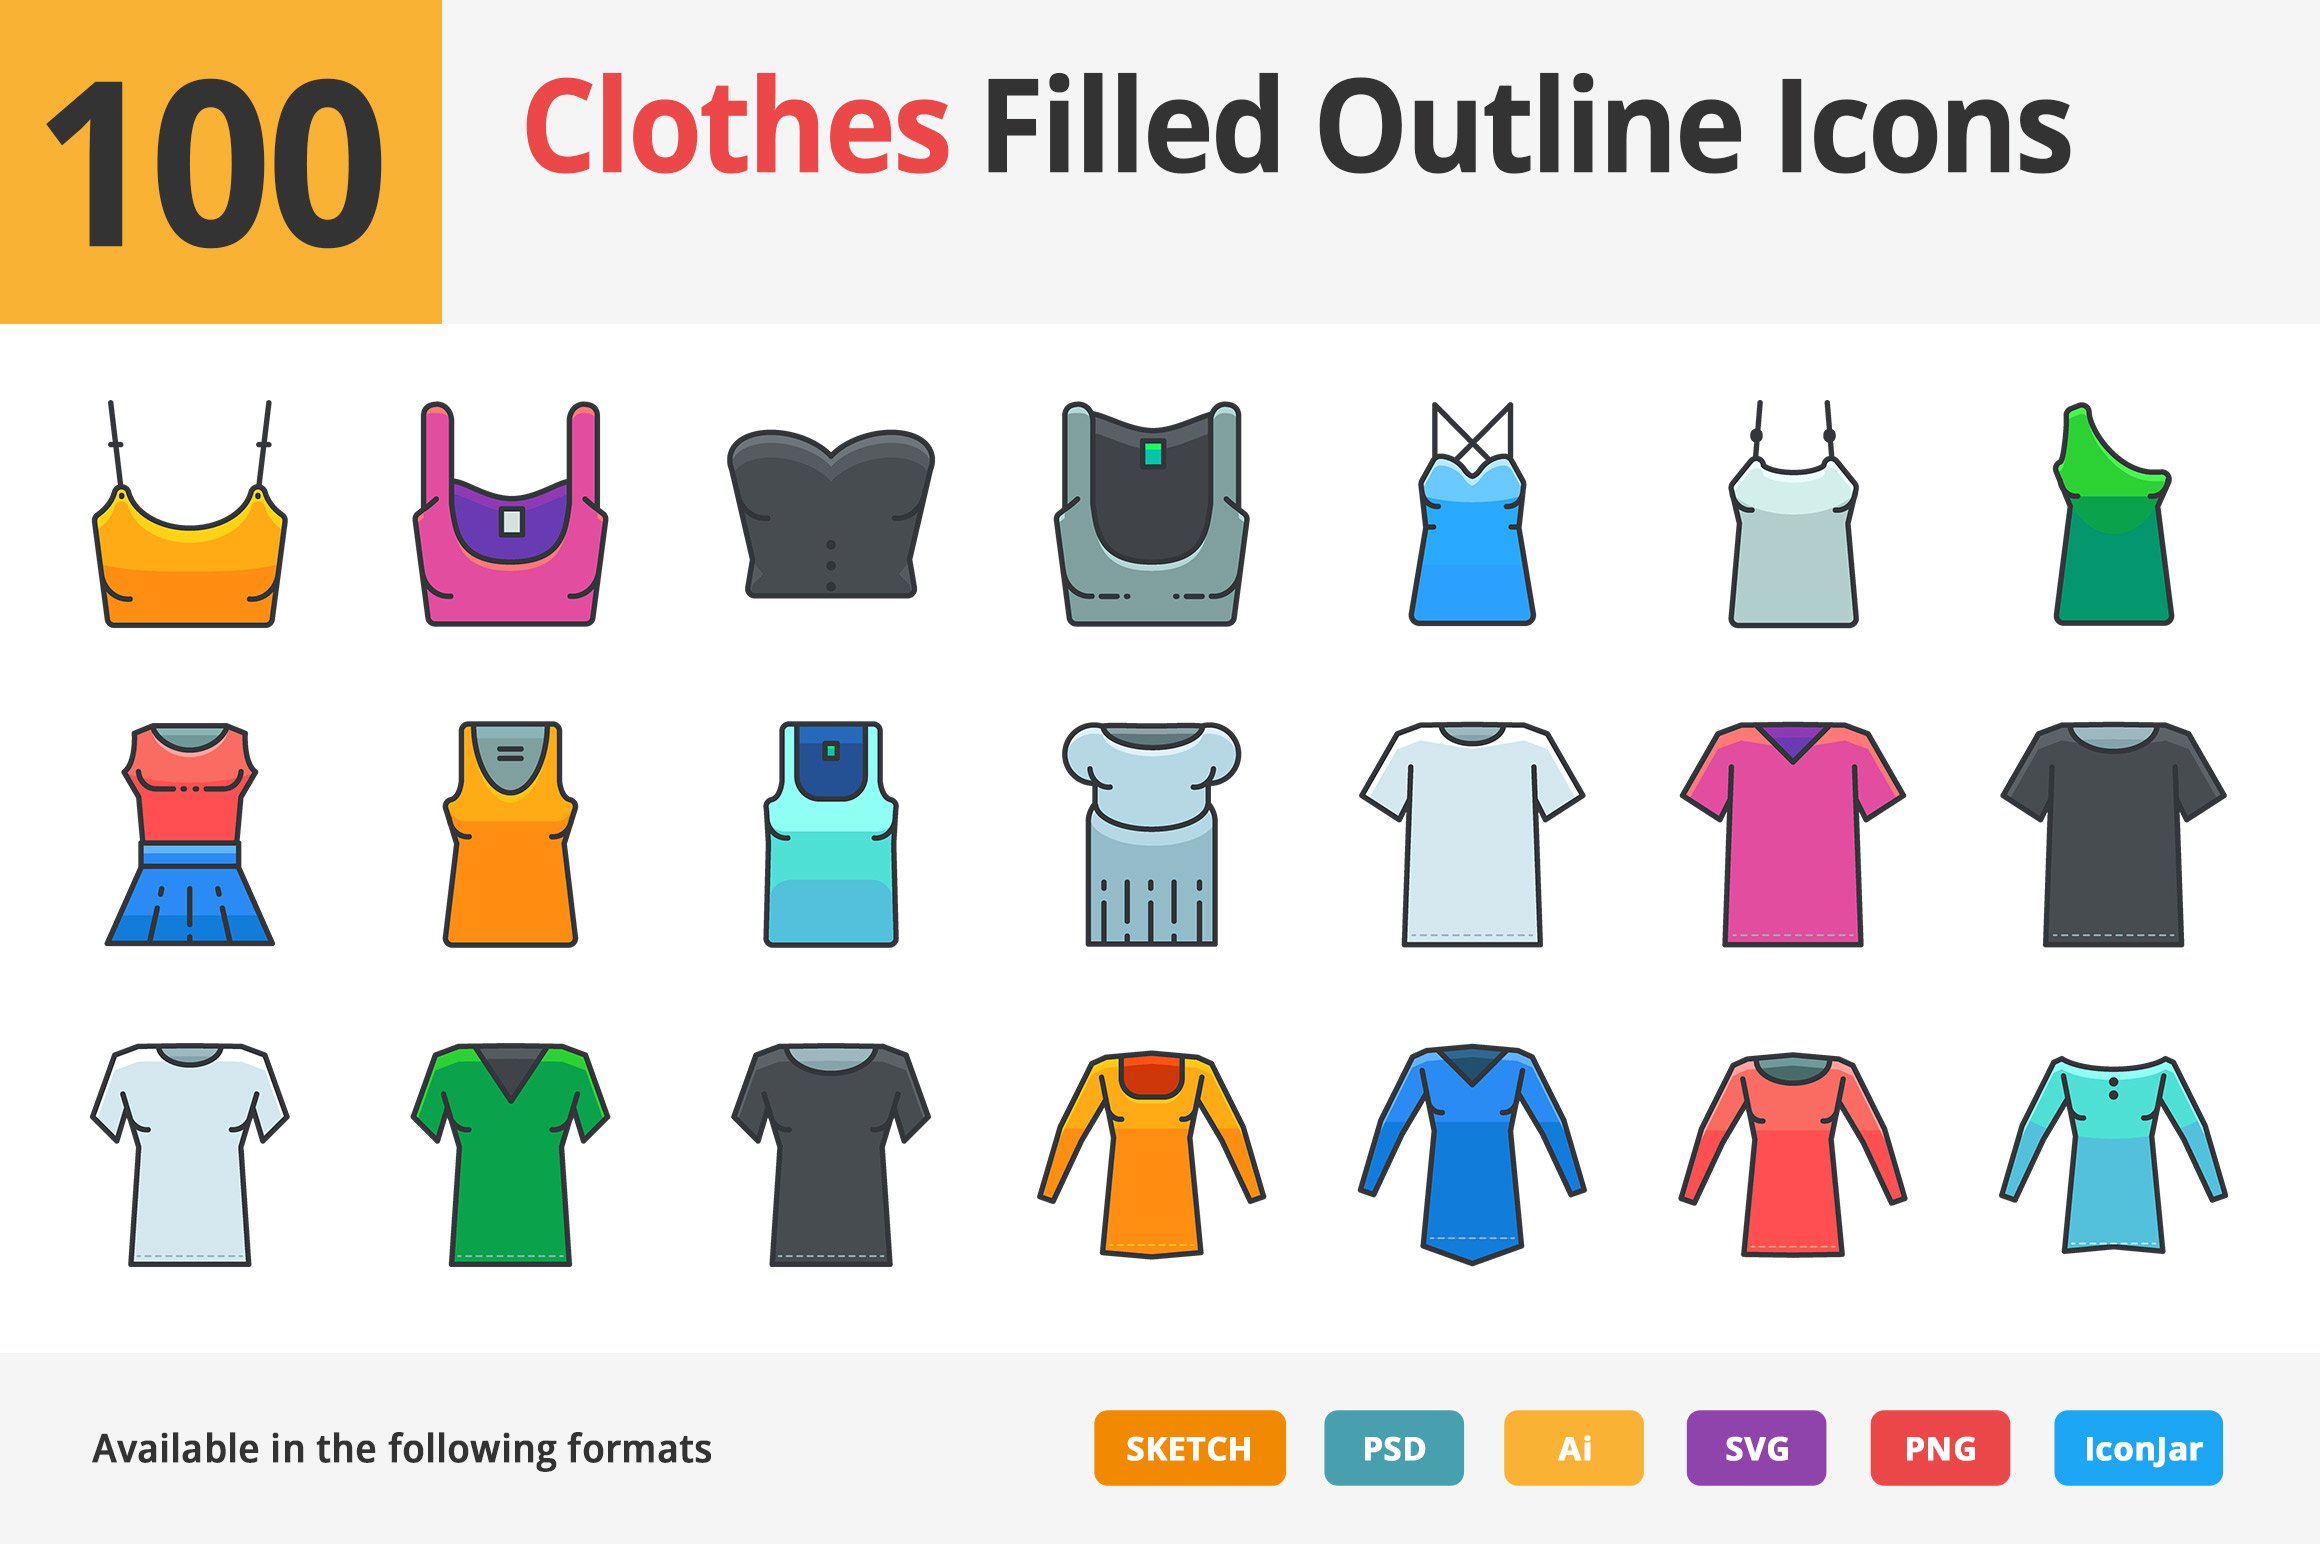 100 Clothes Filled Outline Icons preview image.